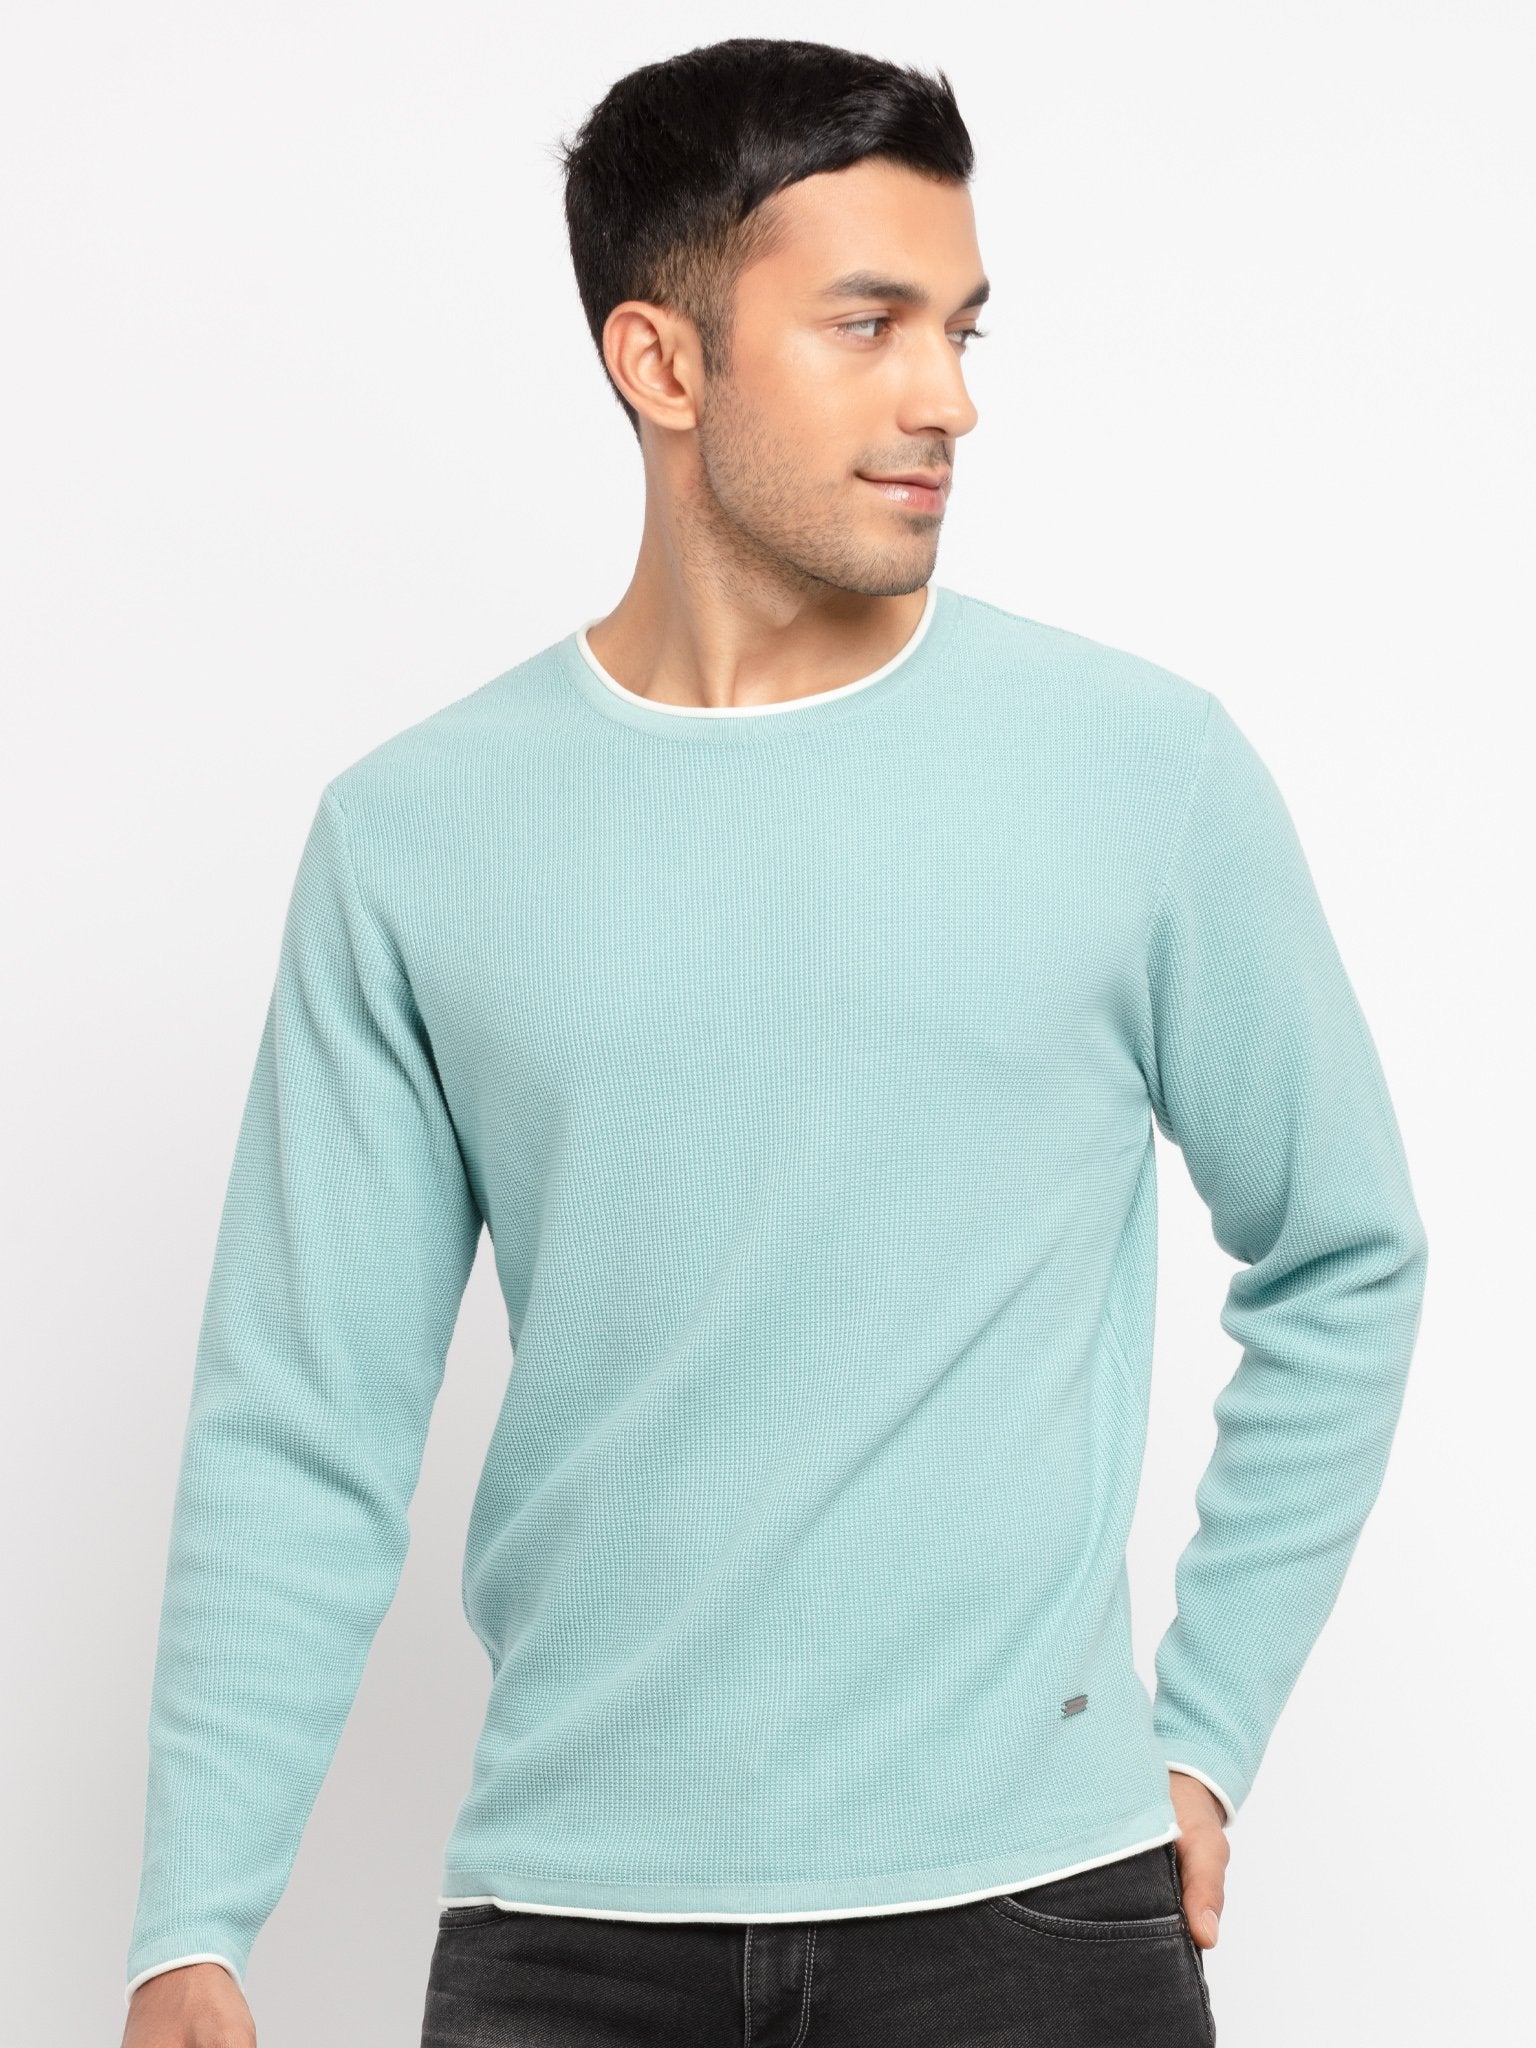 plus size sweaters in India